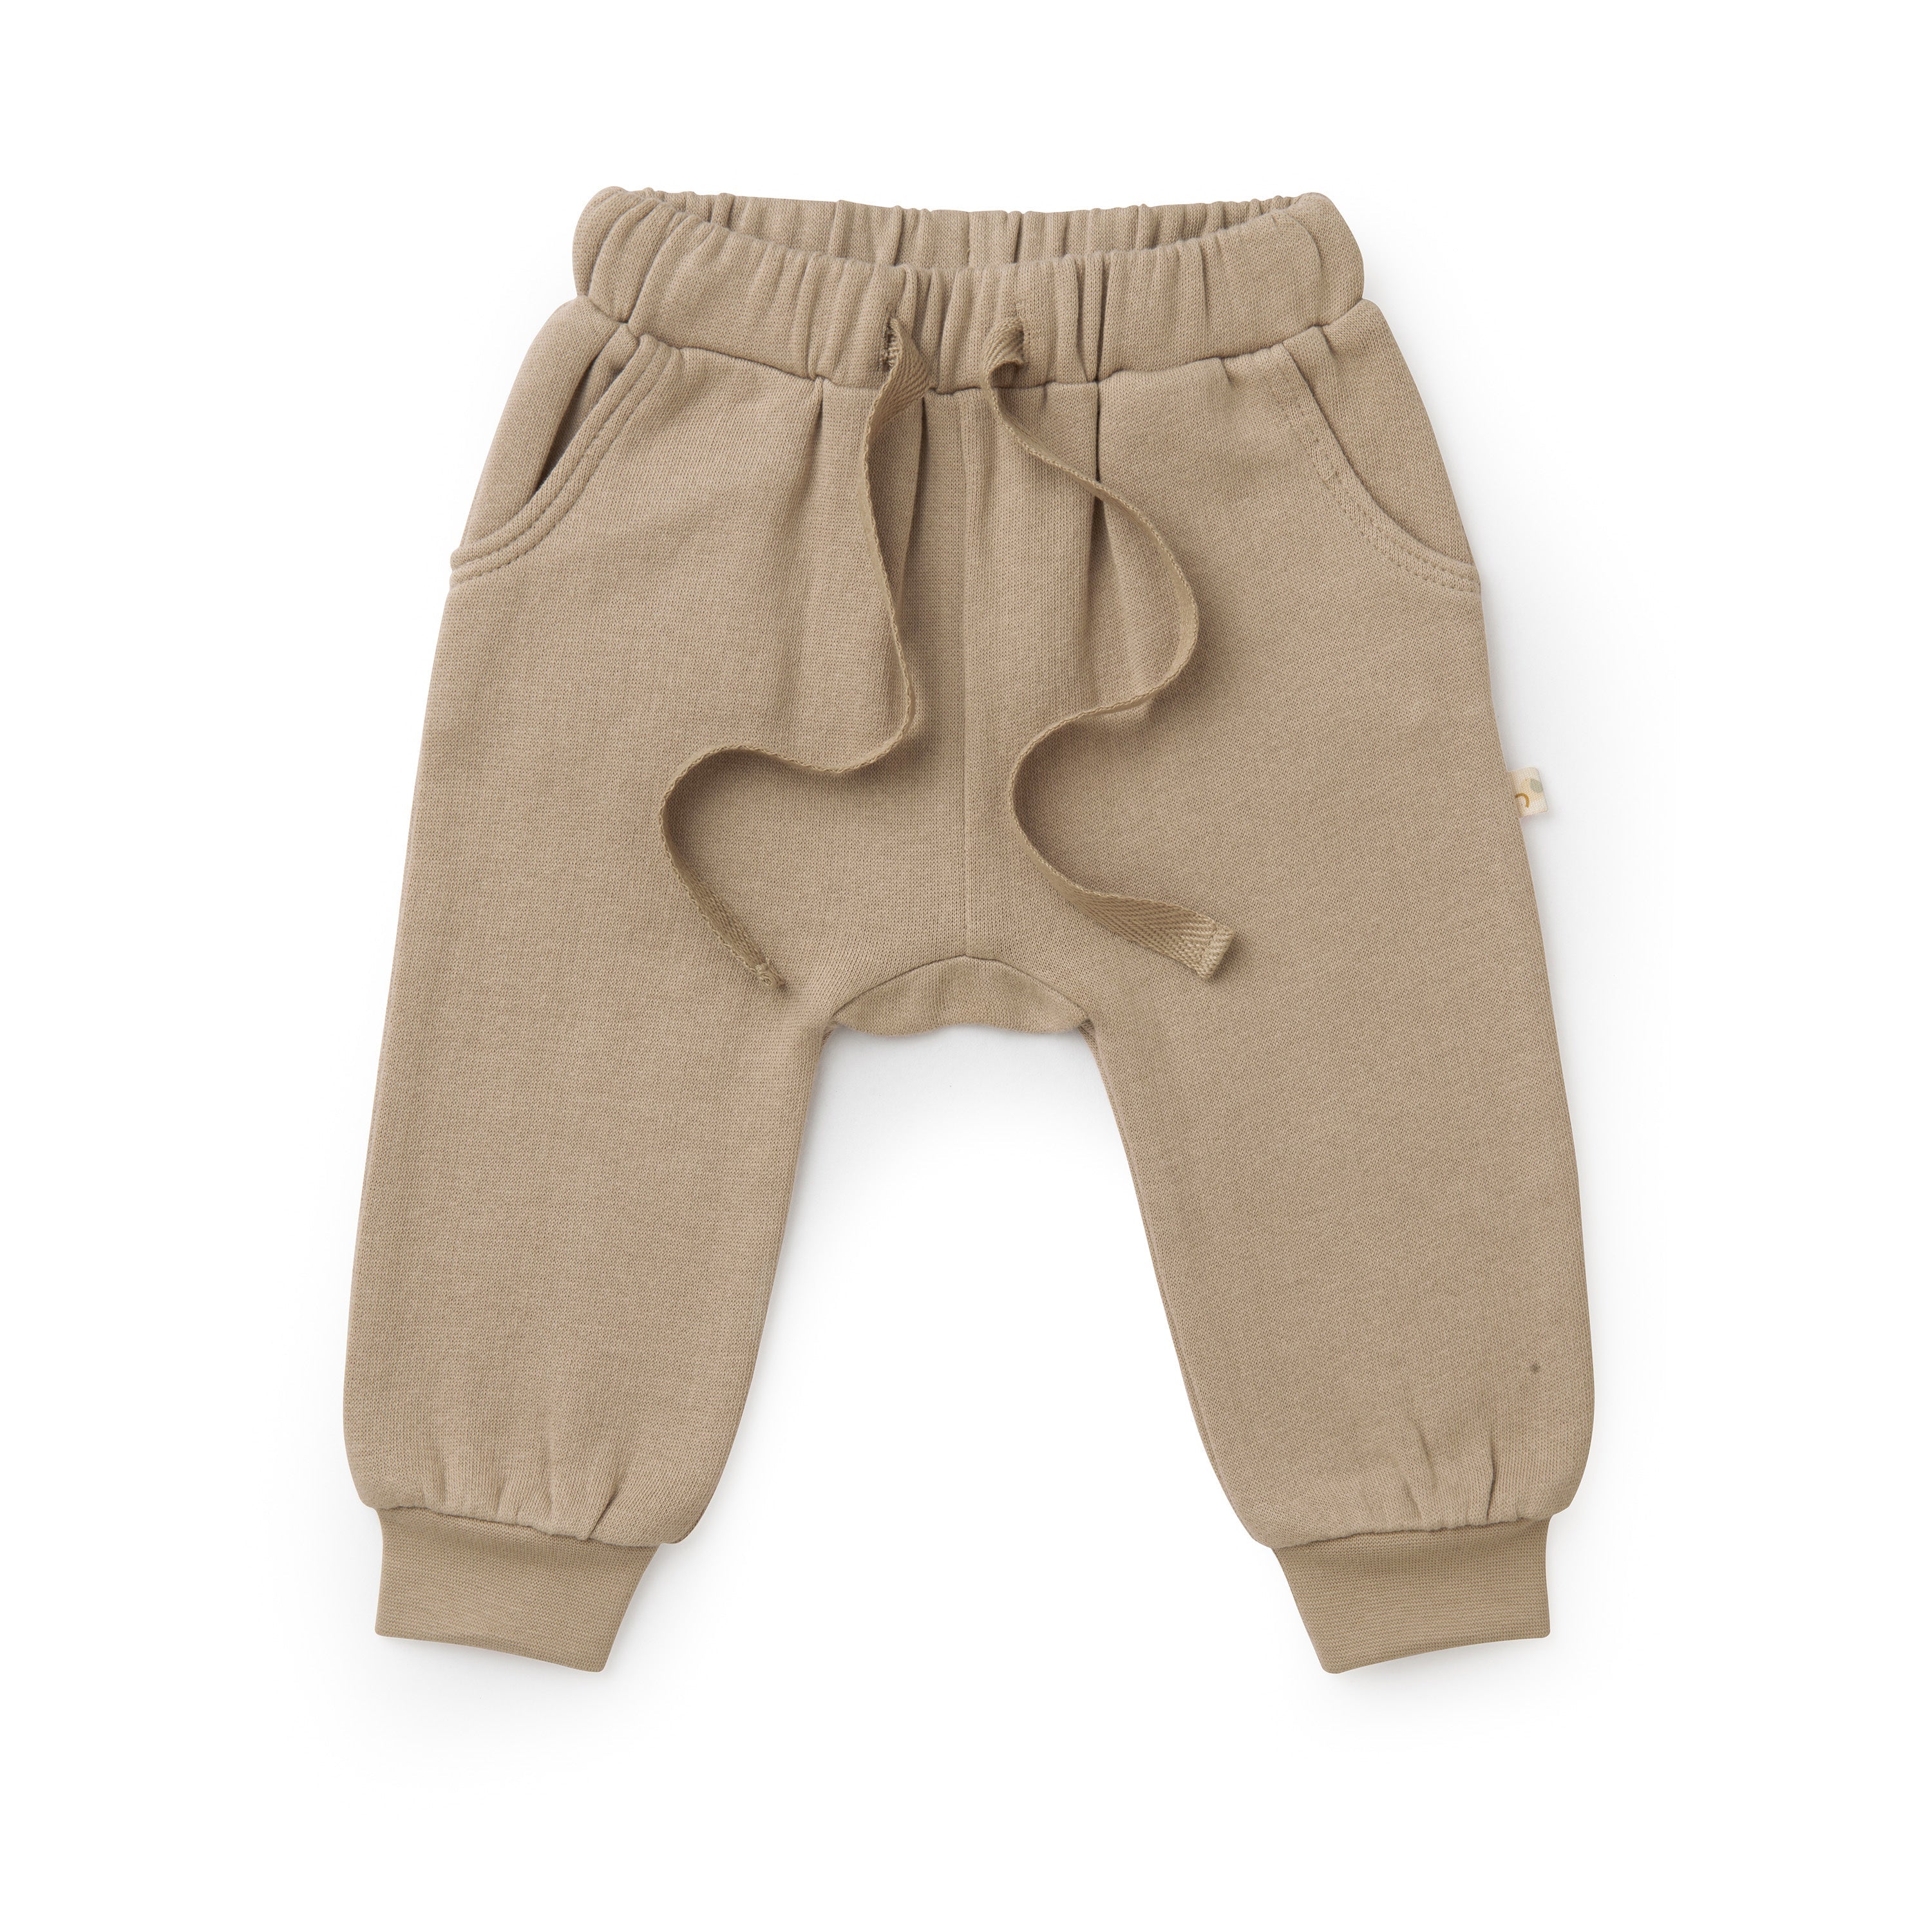 Organic Baby beige toddler jogger pants in Mocha with elastic waistband and drawstrings, displayed on a white background.